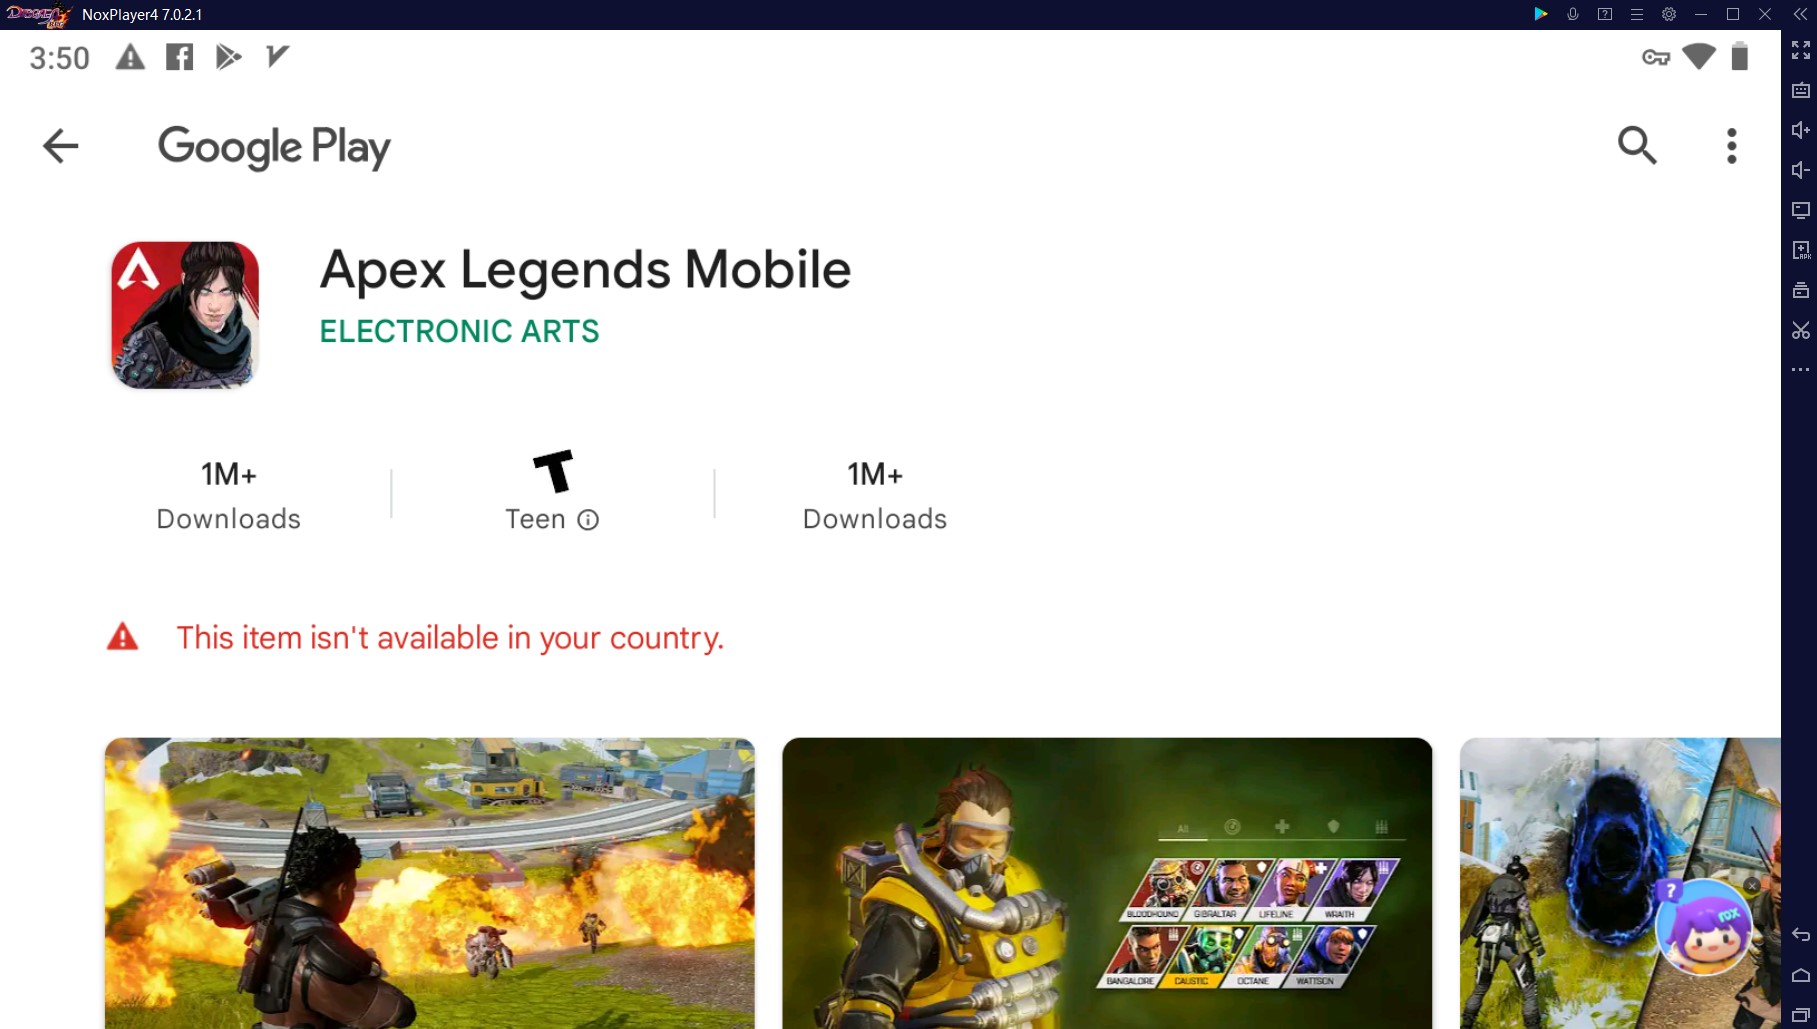 BeReal, Apex Legends Mobile take away Google Play Users' Choice